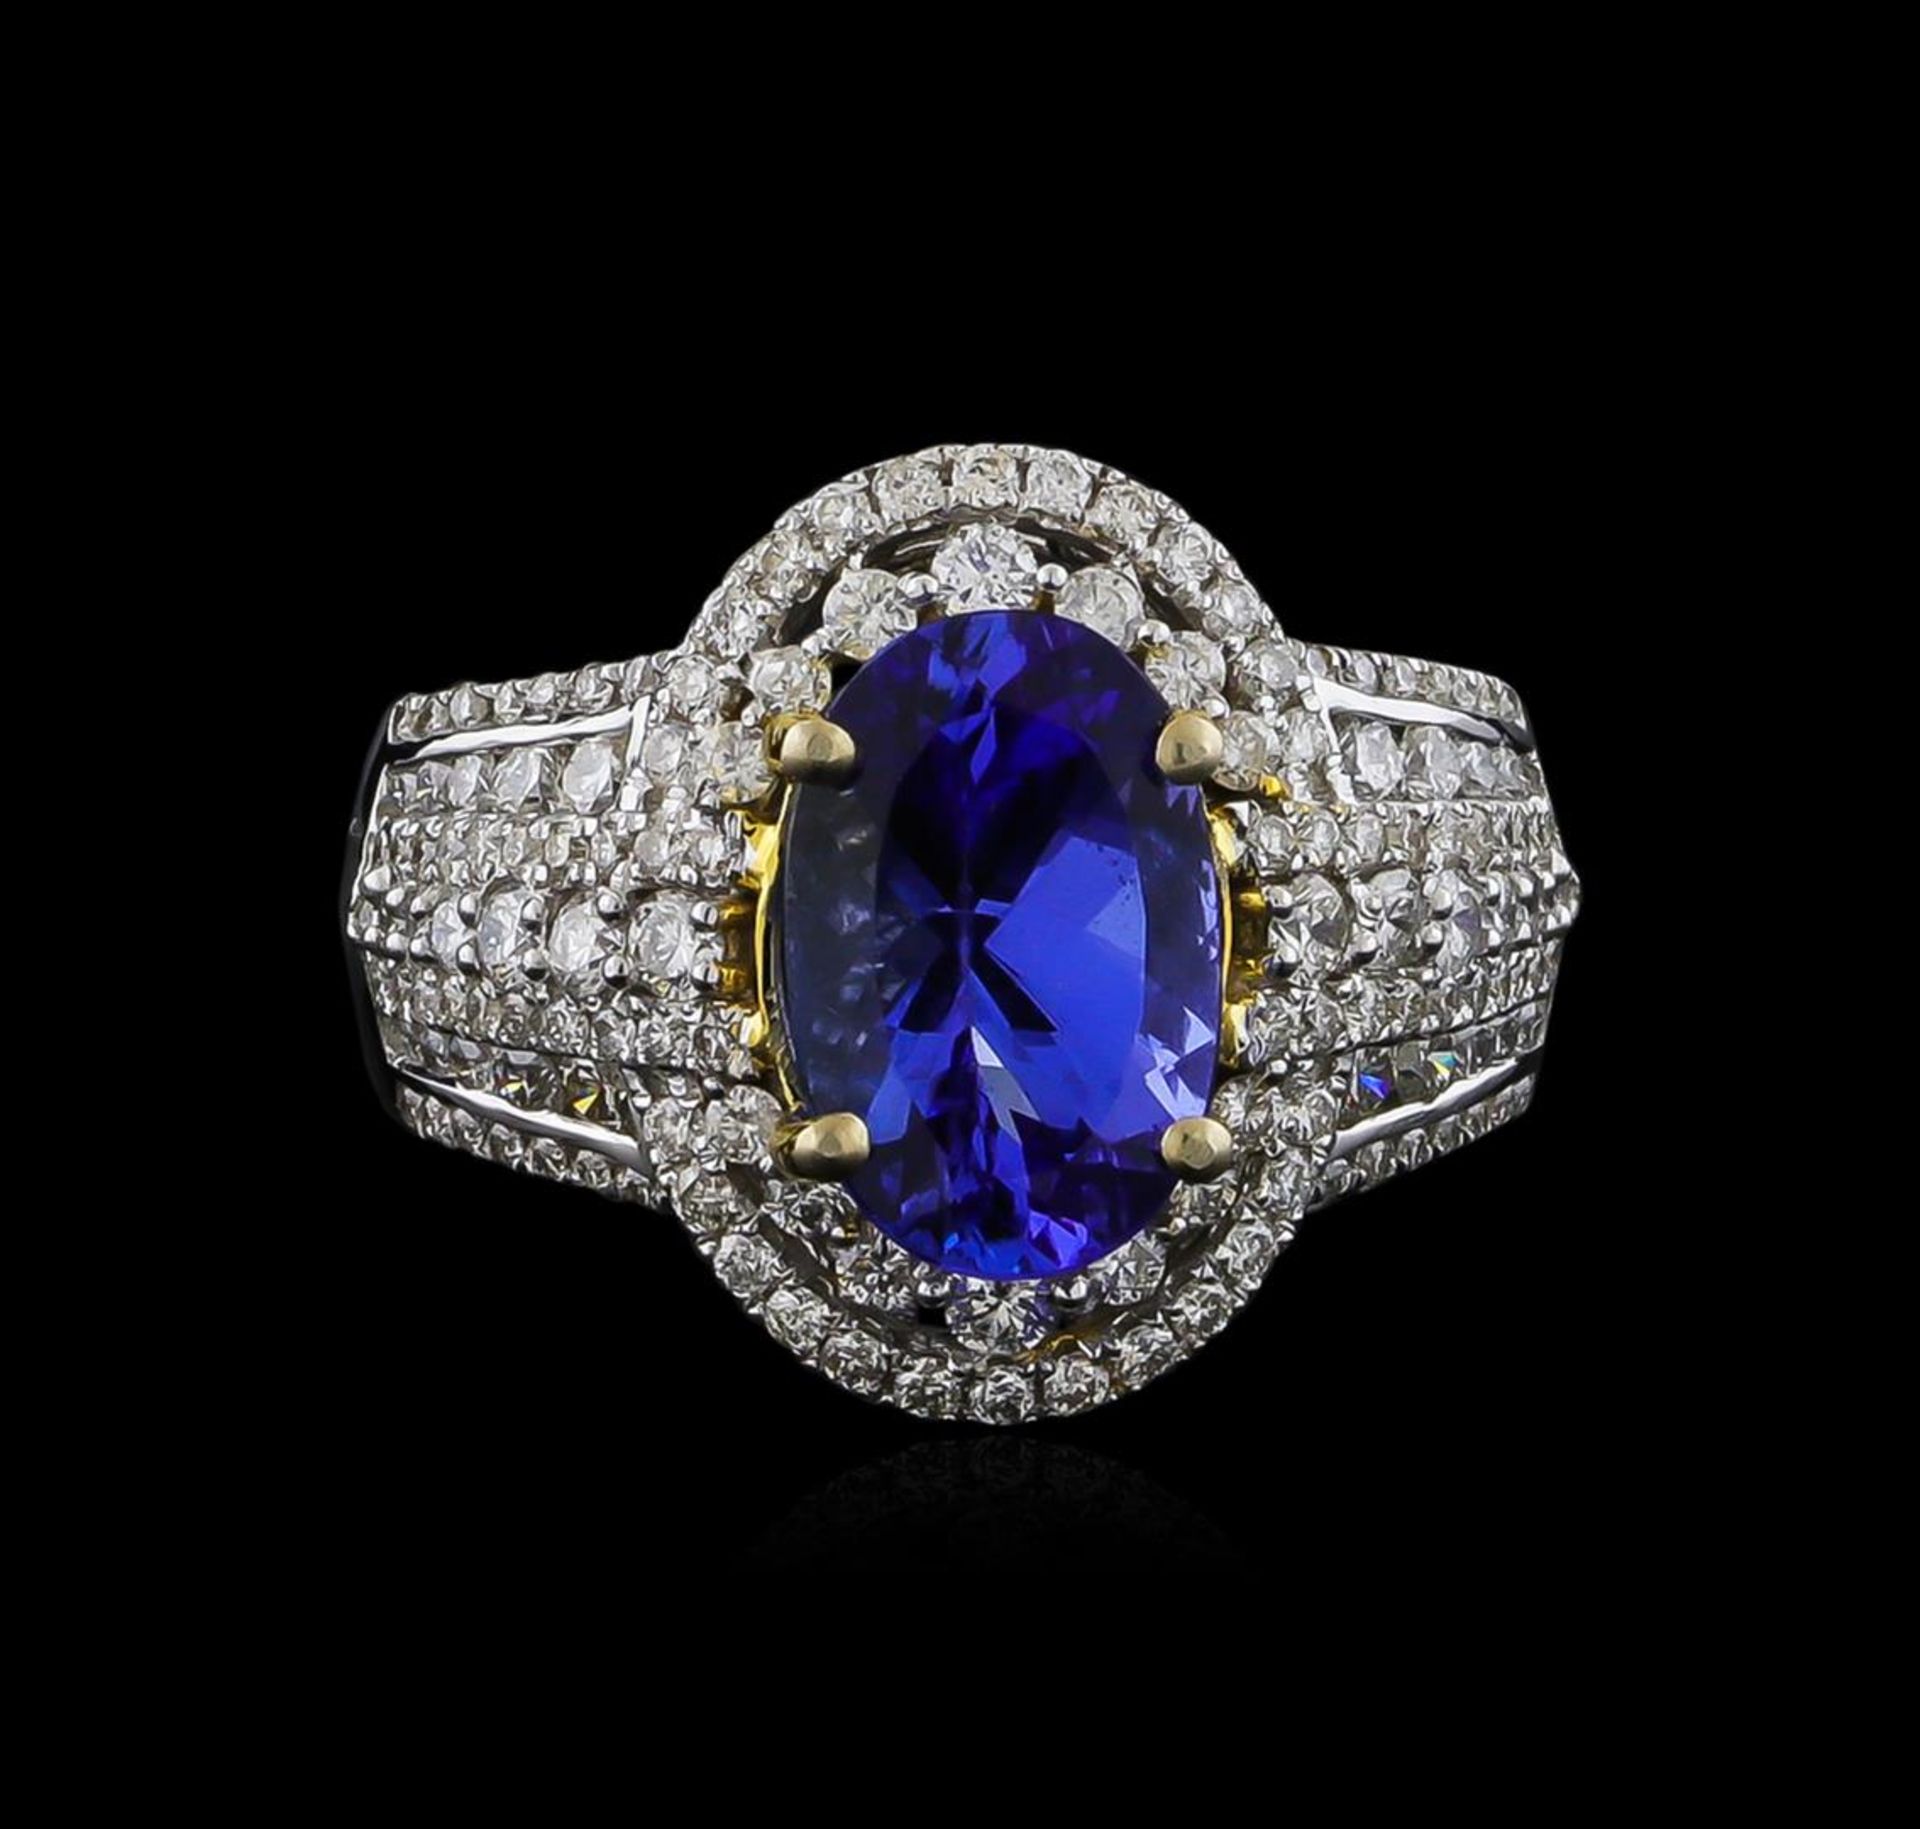 14KT Two-Tone Gold 4.12 ctw Tanzanite and Diamond Ring - Image 2 of 5